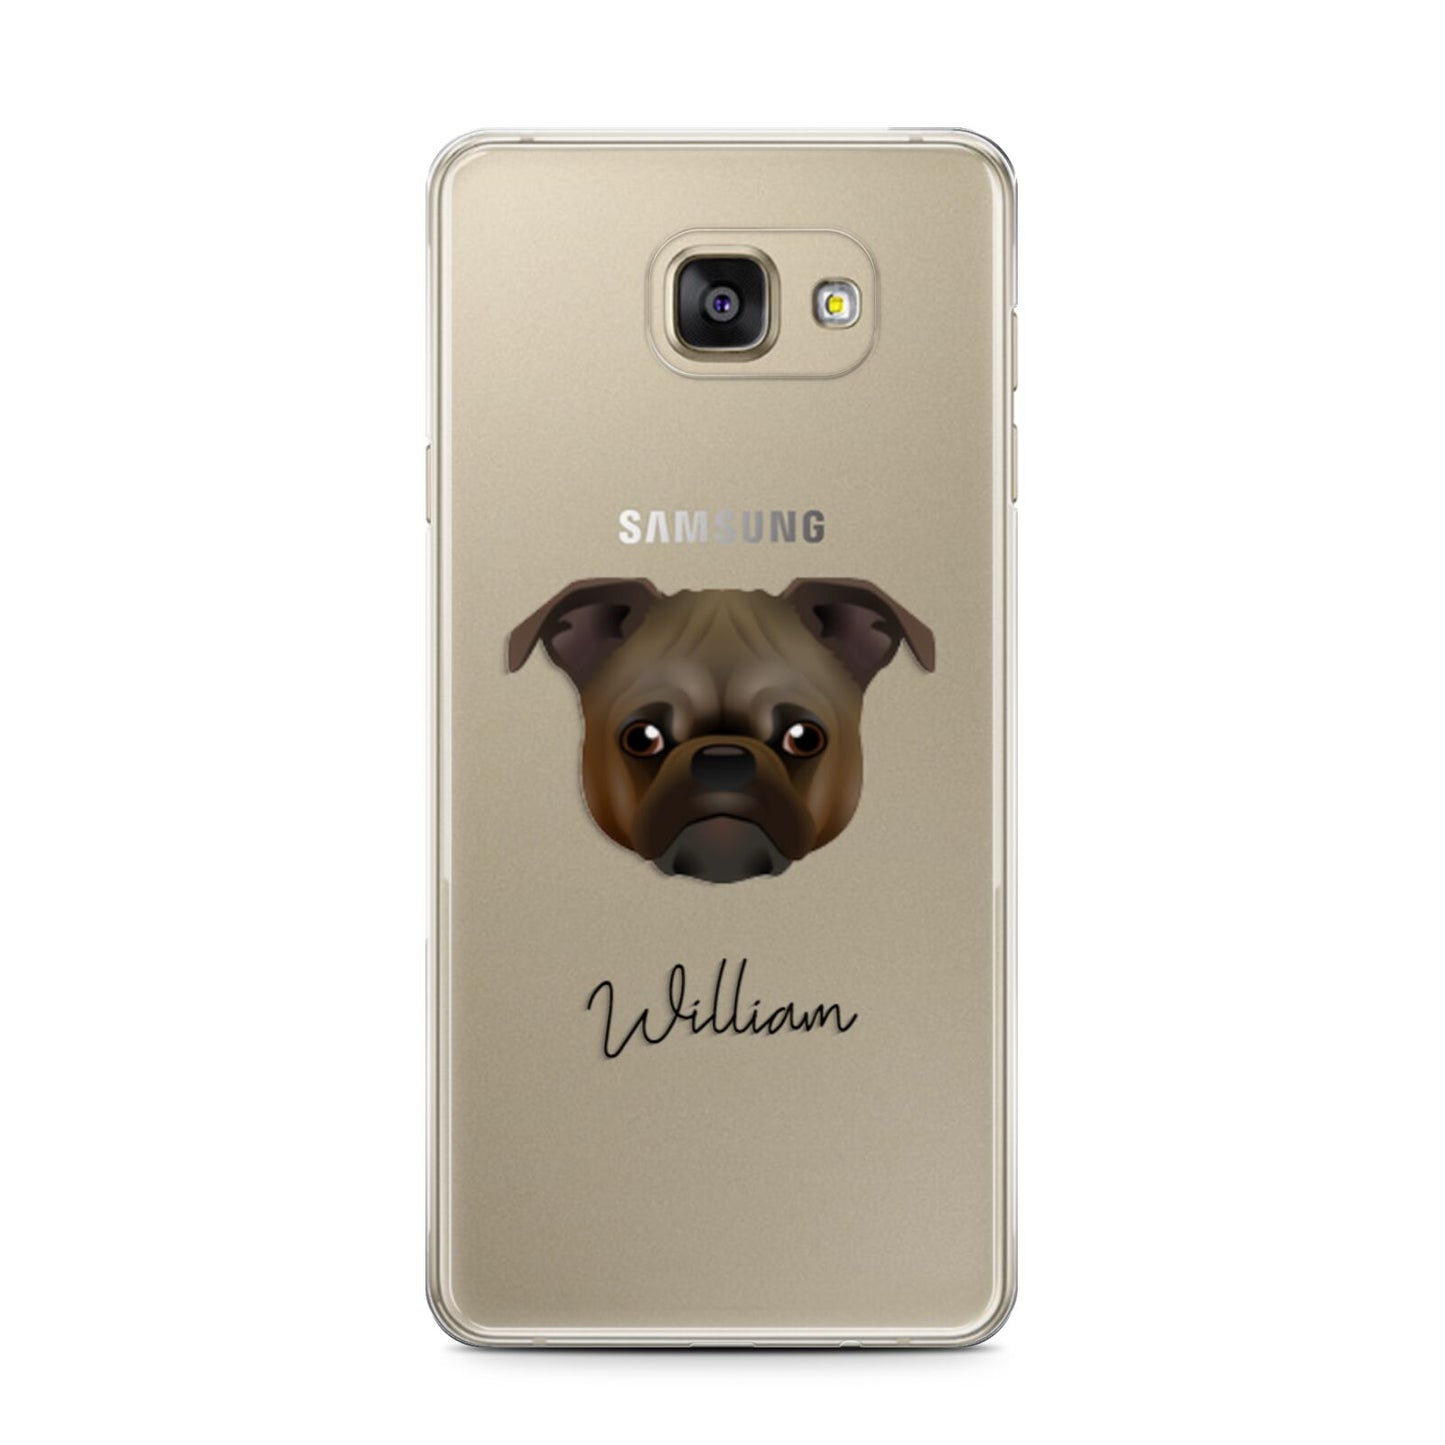 Chug Personalised Samsung Galaxy A7 2016 Case on gold phone